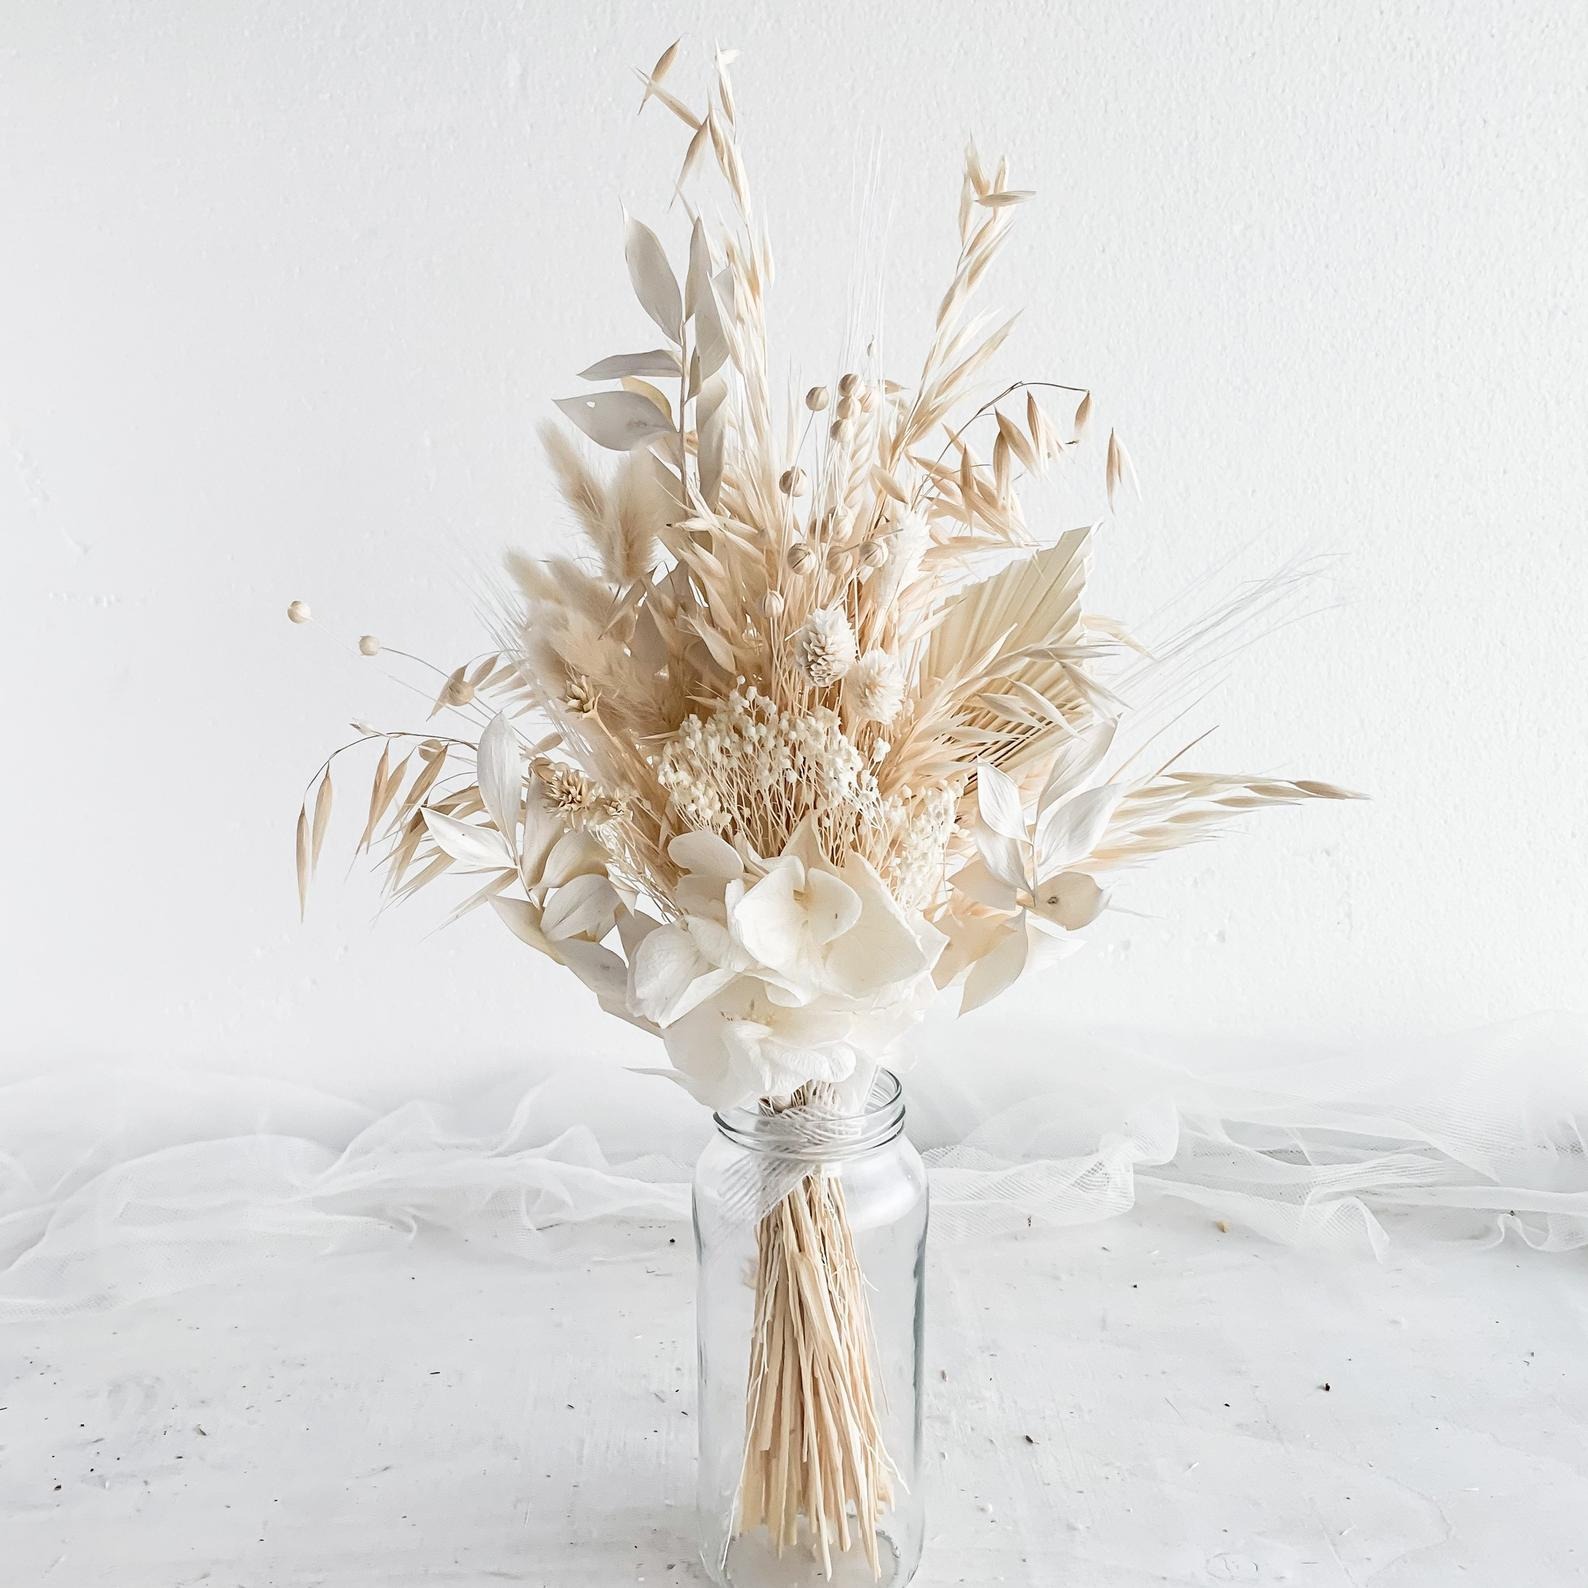 neutral tone minimalist dried floral bunch from Etsyy